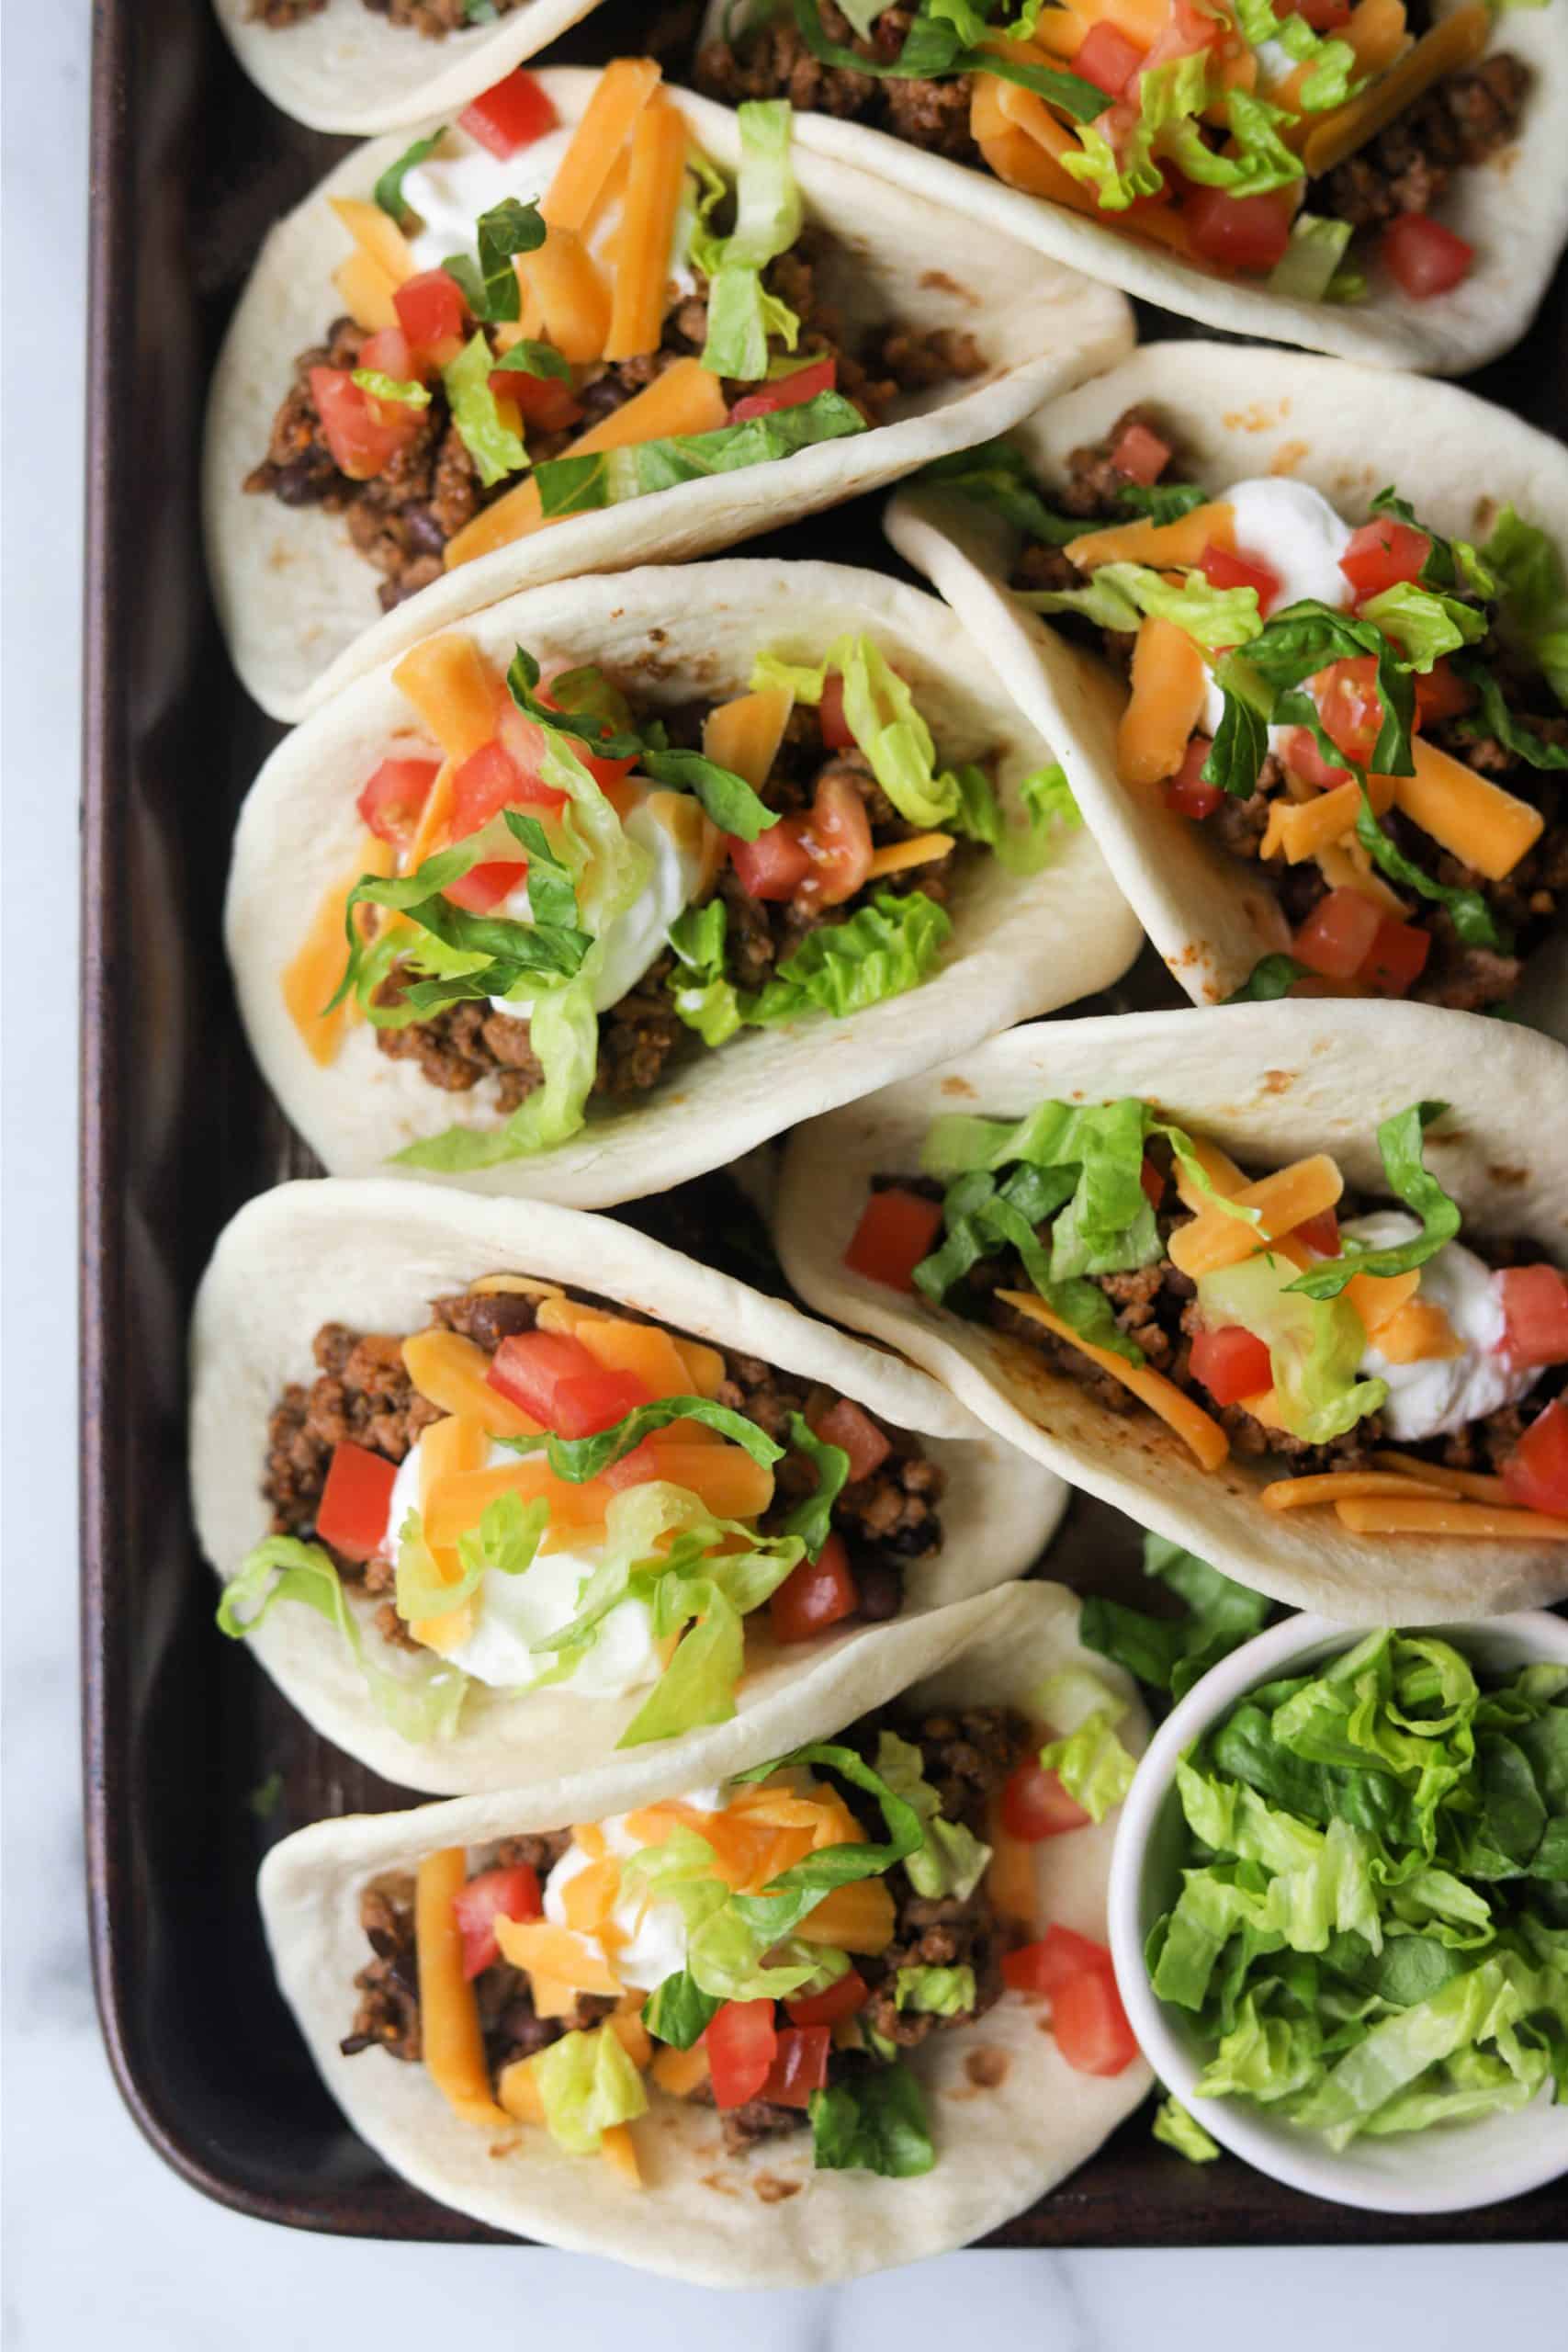 A tray filled with beef tacos.